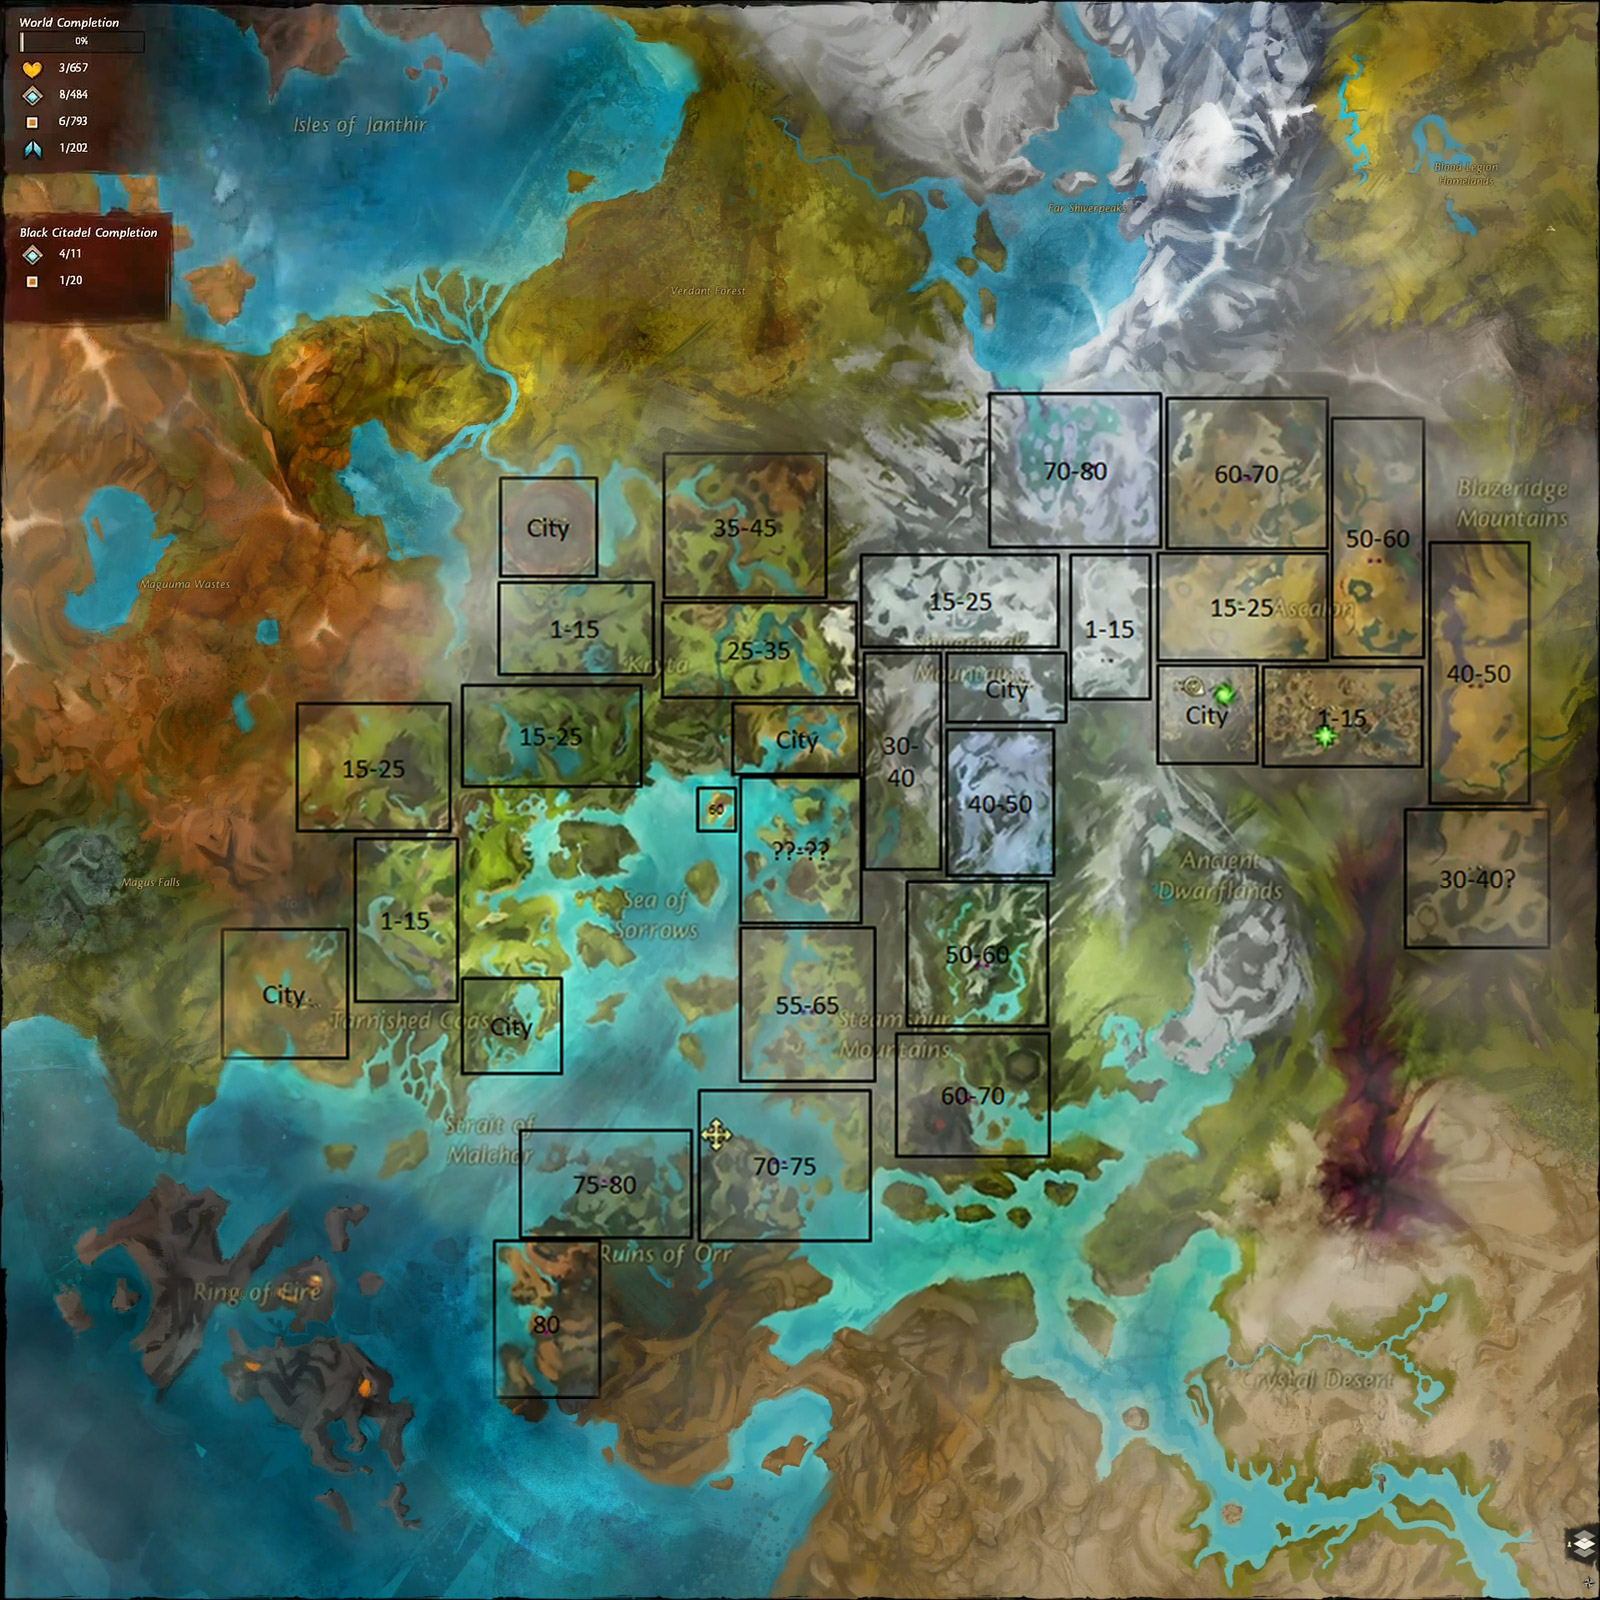 guild wars 2 path of fire map Guild Wars 2 Map With Level Range Guild Wars 2 Life guild wars 2 path of fire map